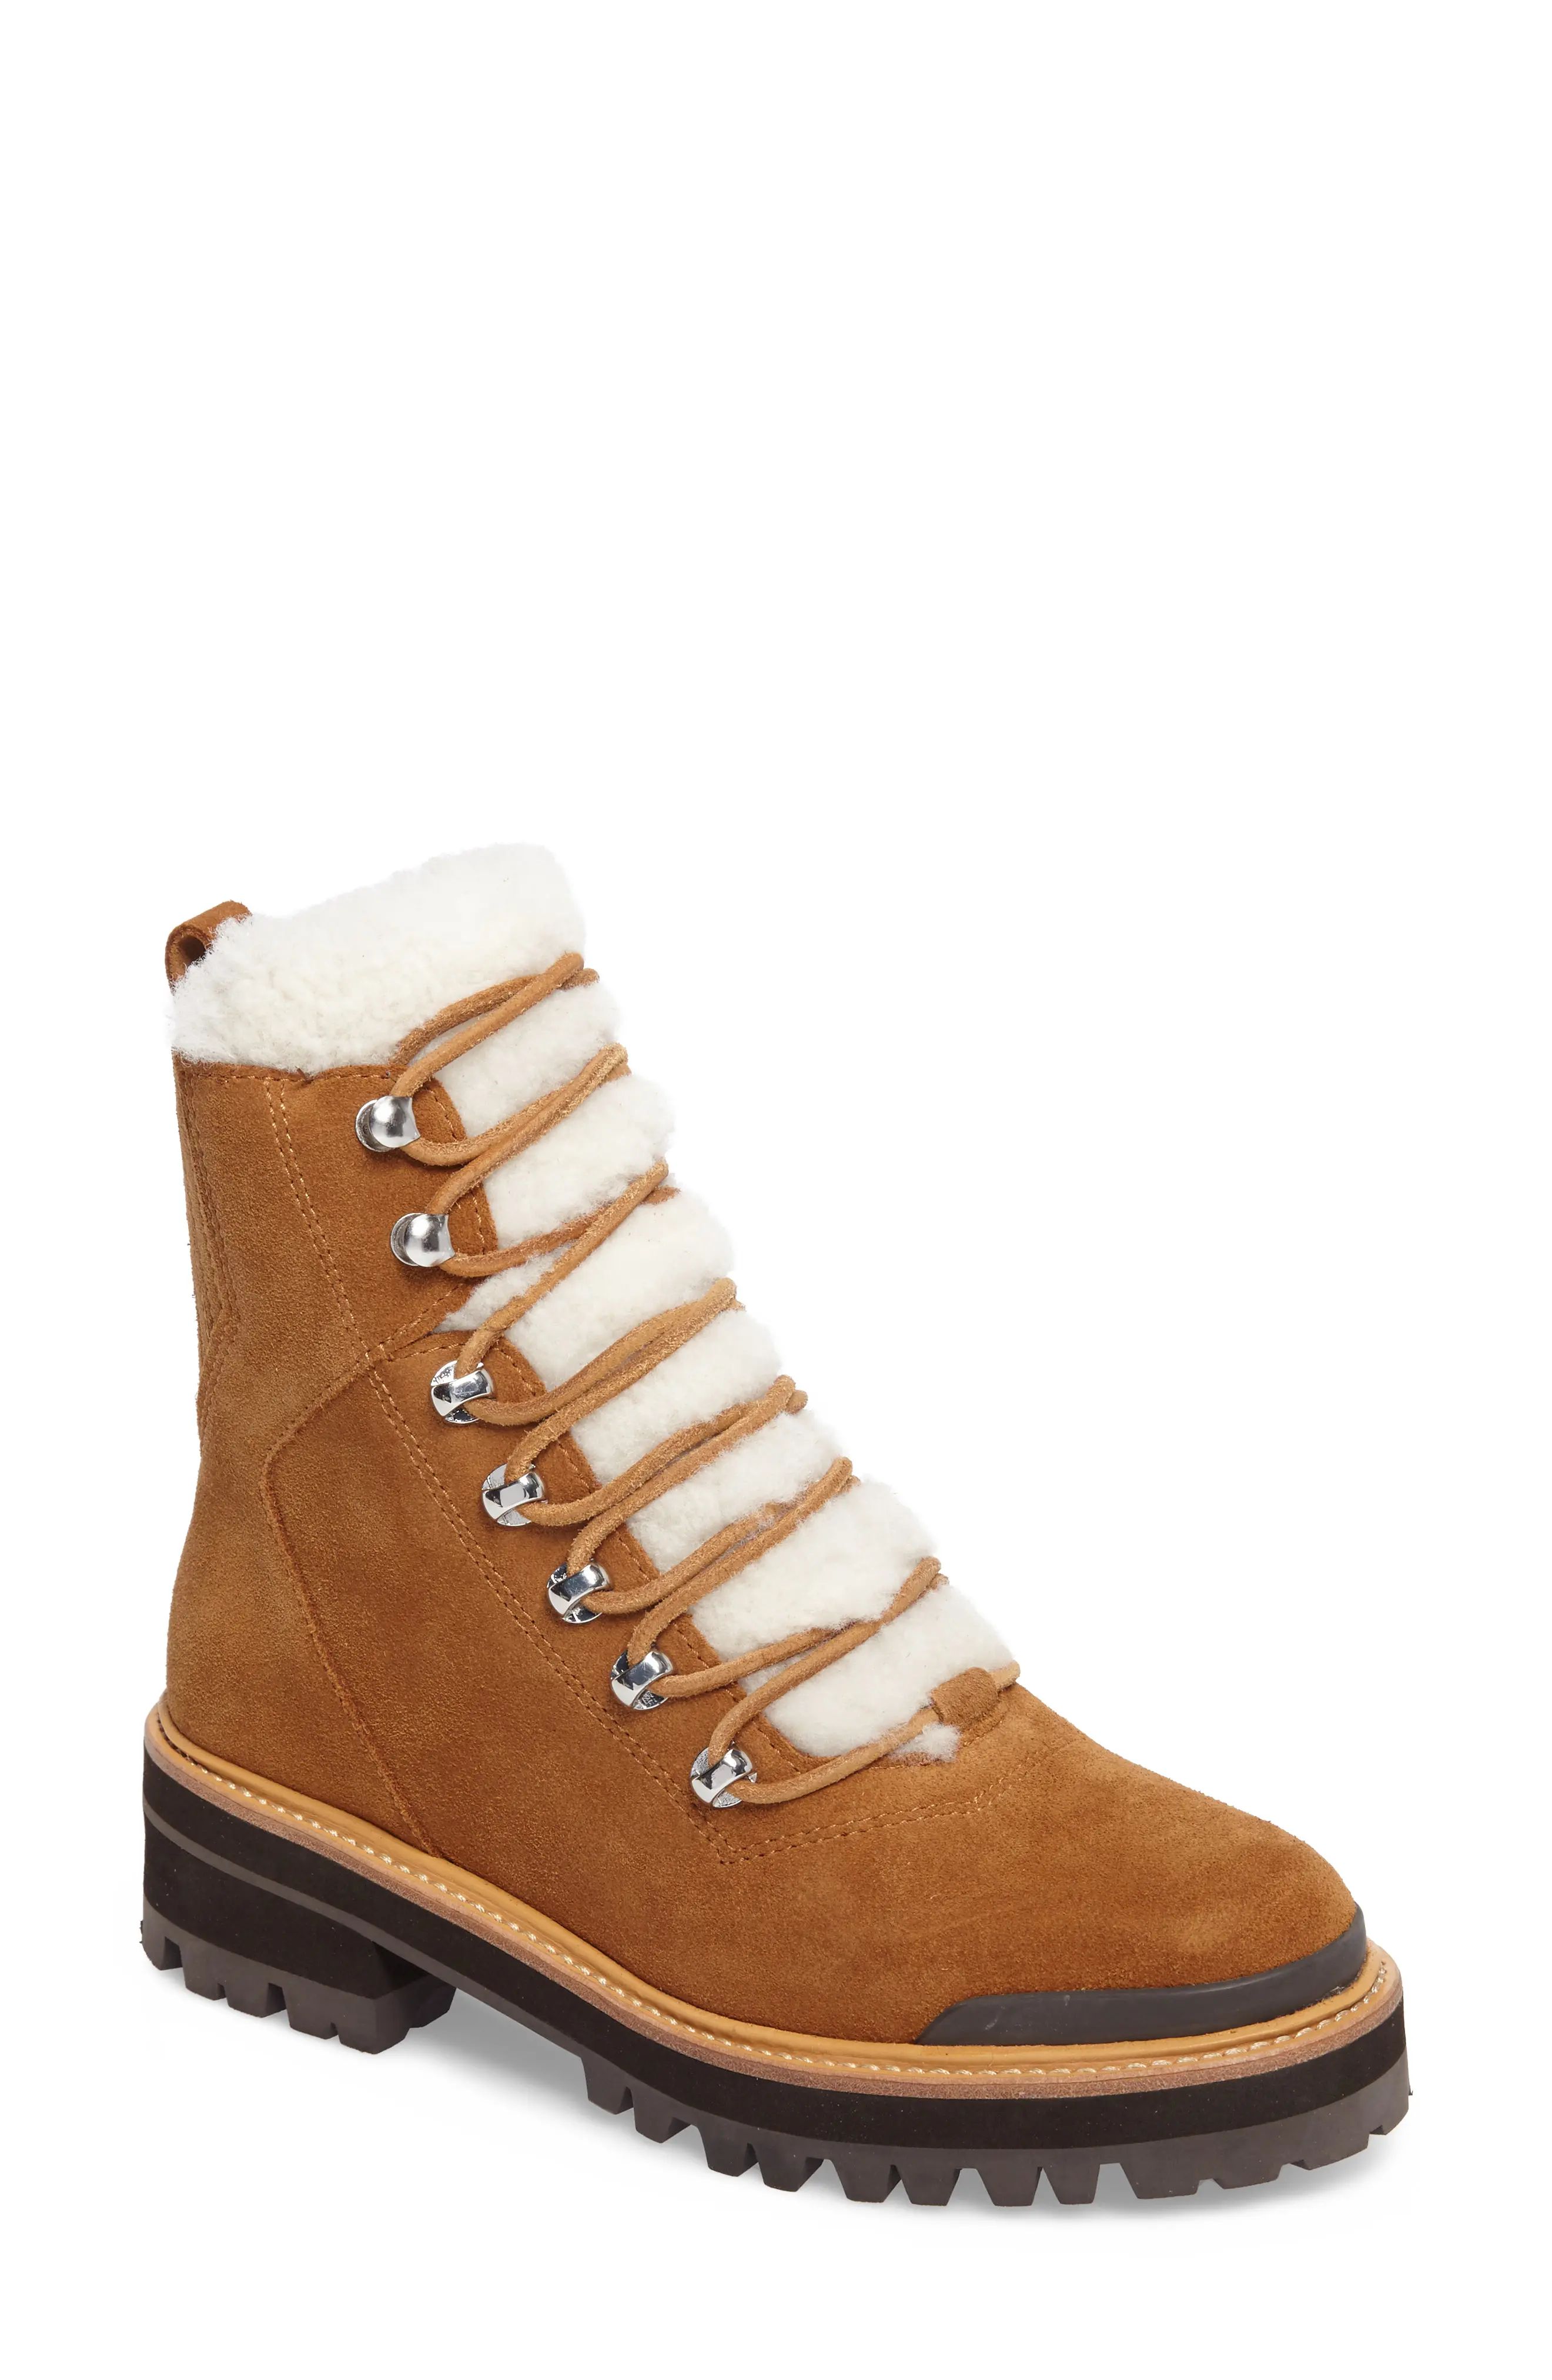 Marc Fisher LTD Izzie Genuine Shearling Lace-Up Boot, Size 7 in Cognac Suede at Nordstrom | Nordstrom